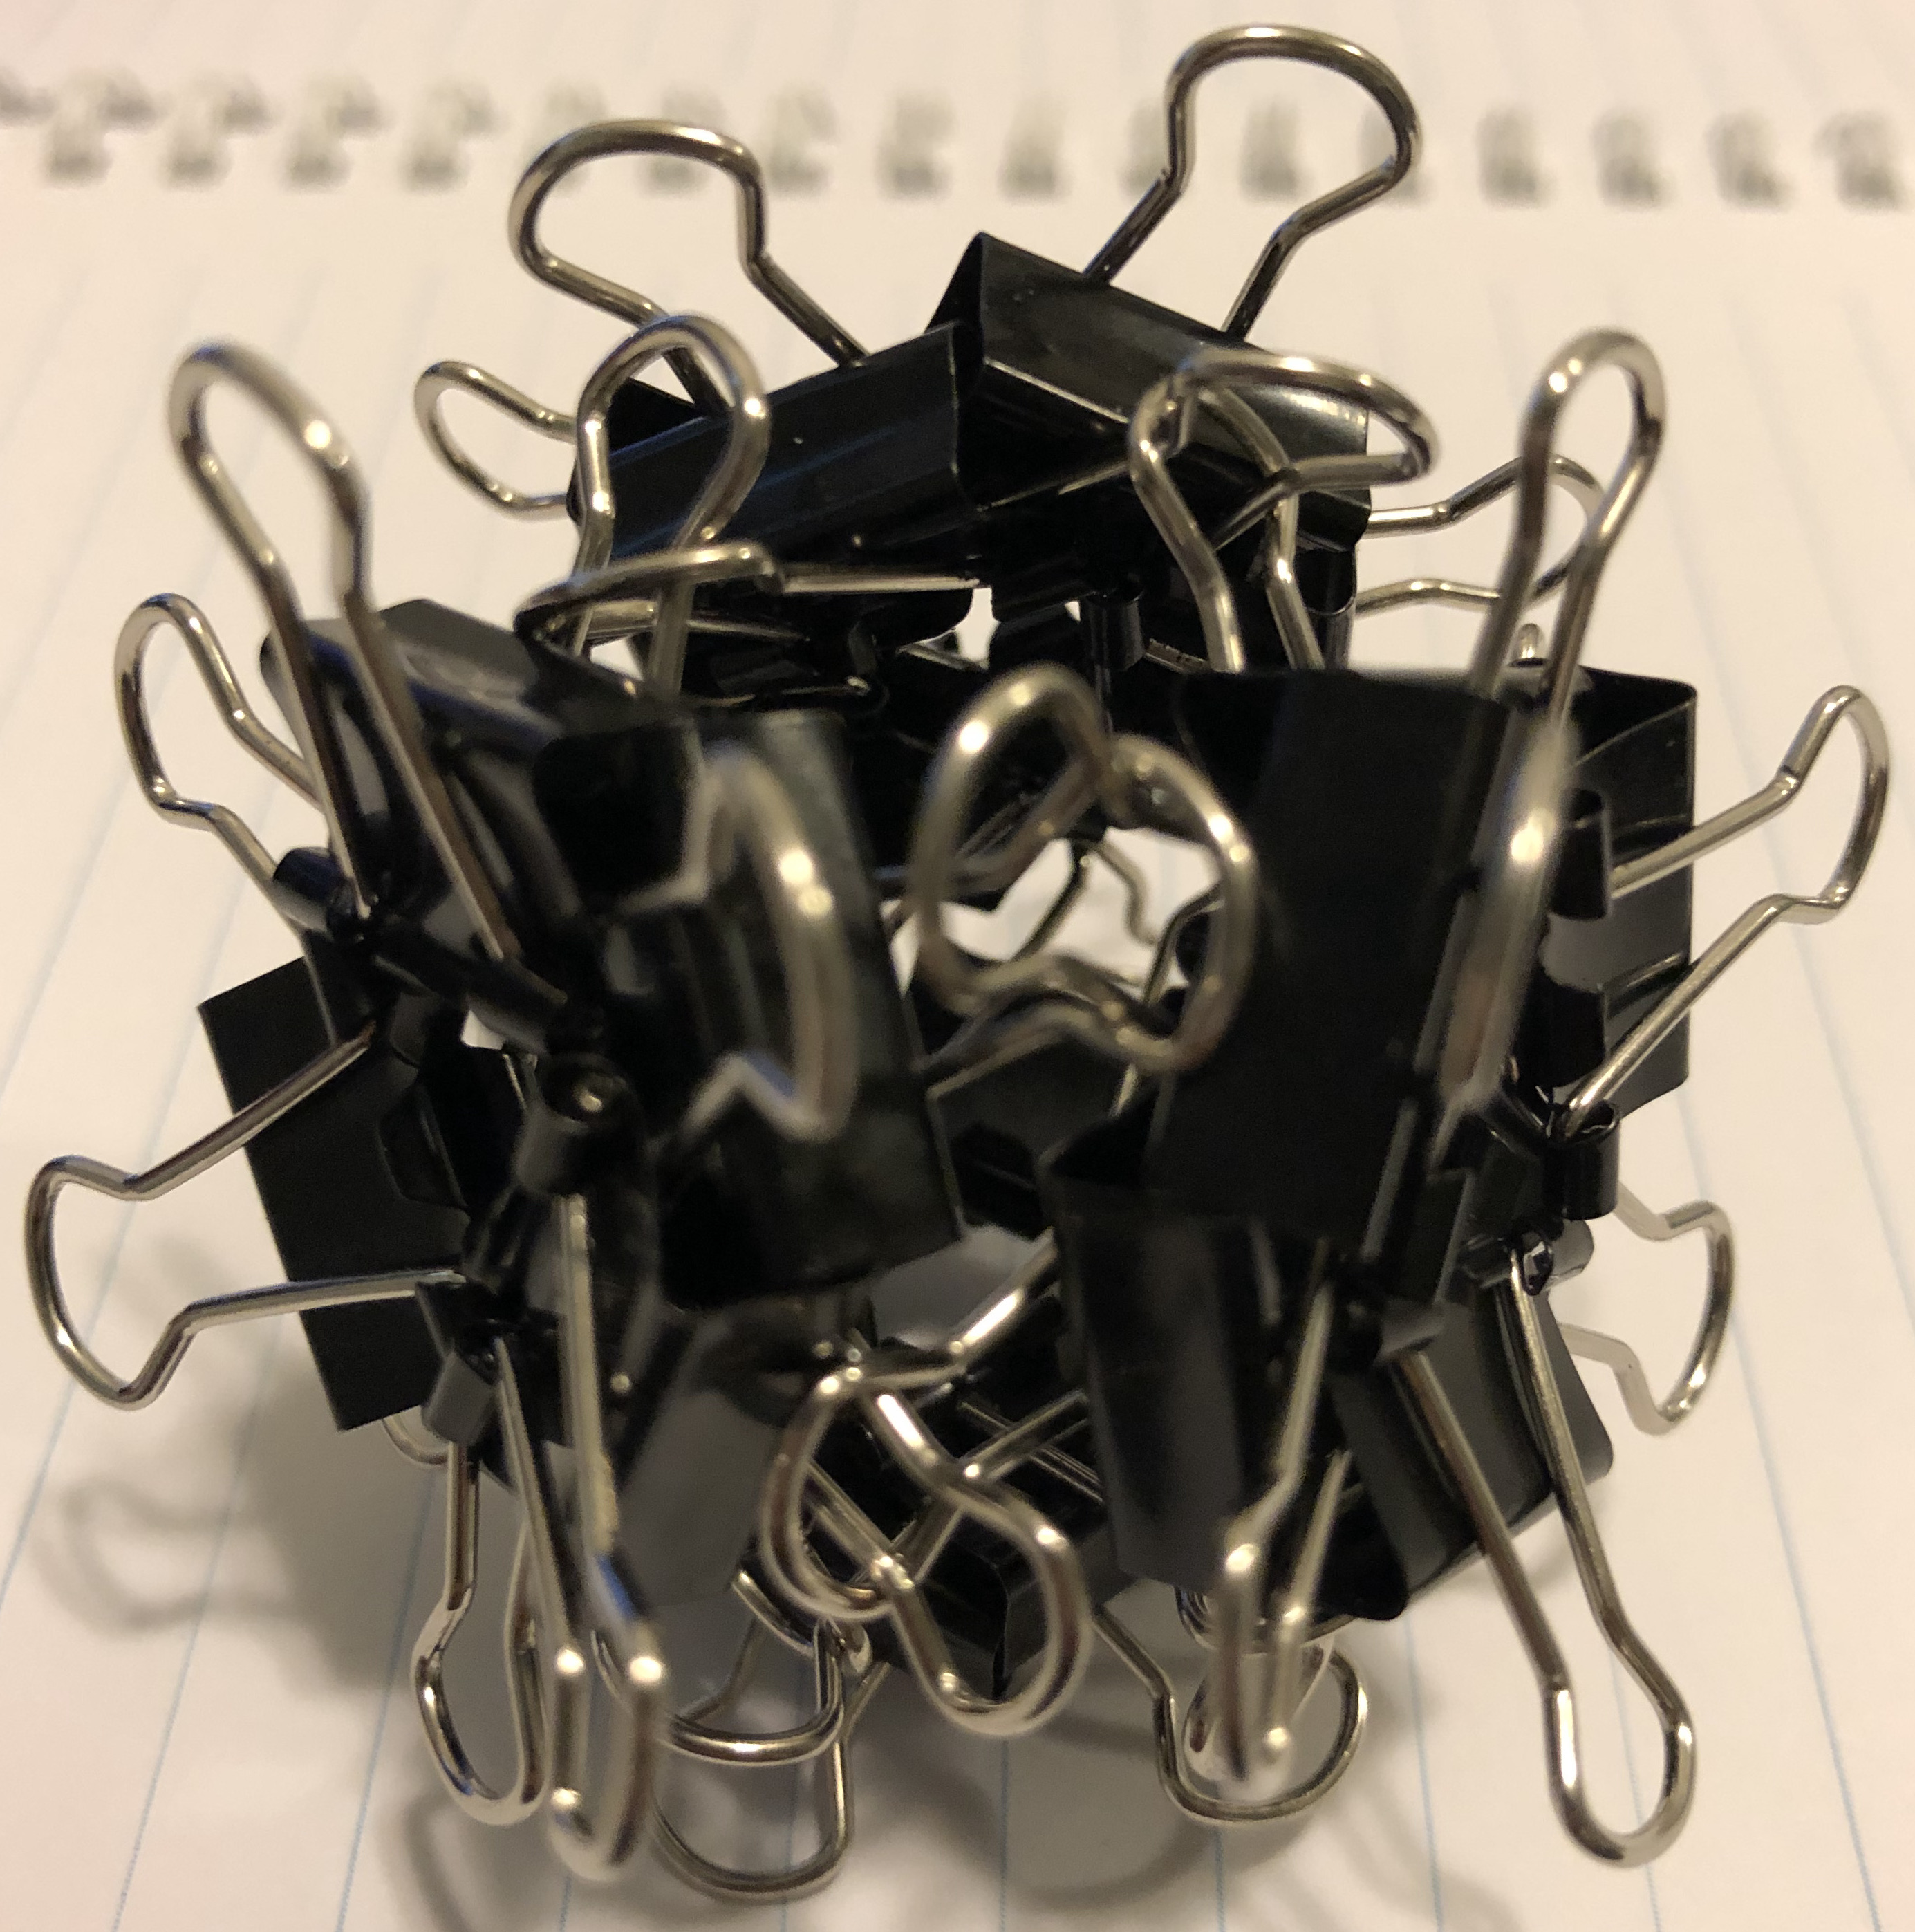 24 clips forming 4 Η-vertices forming tetrahedron